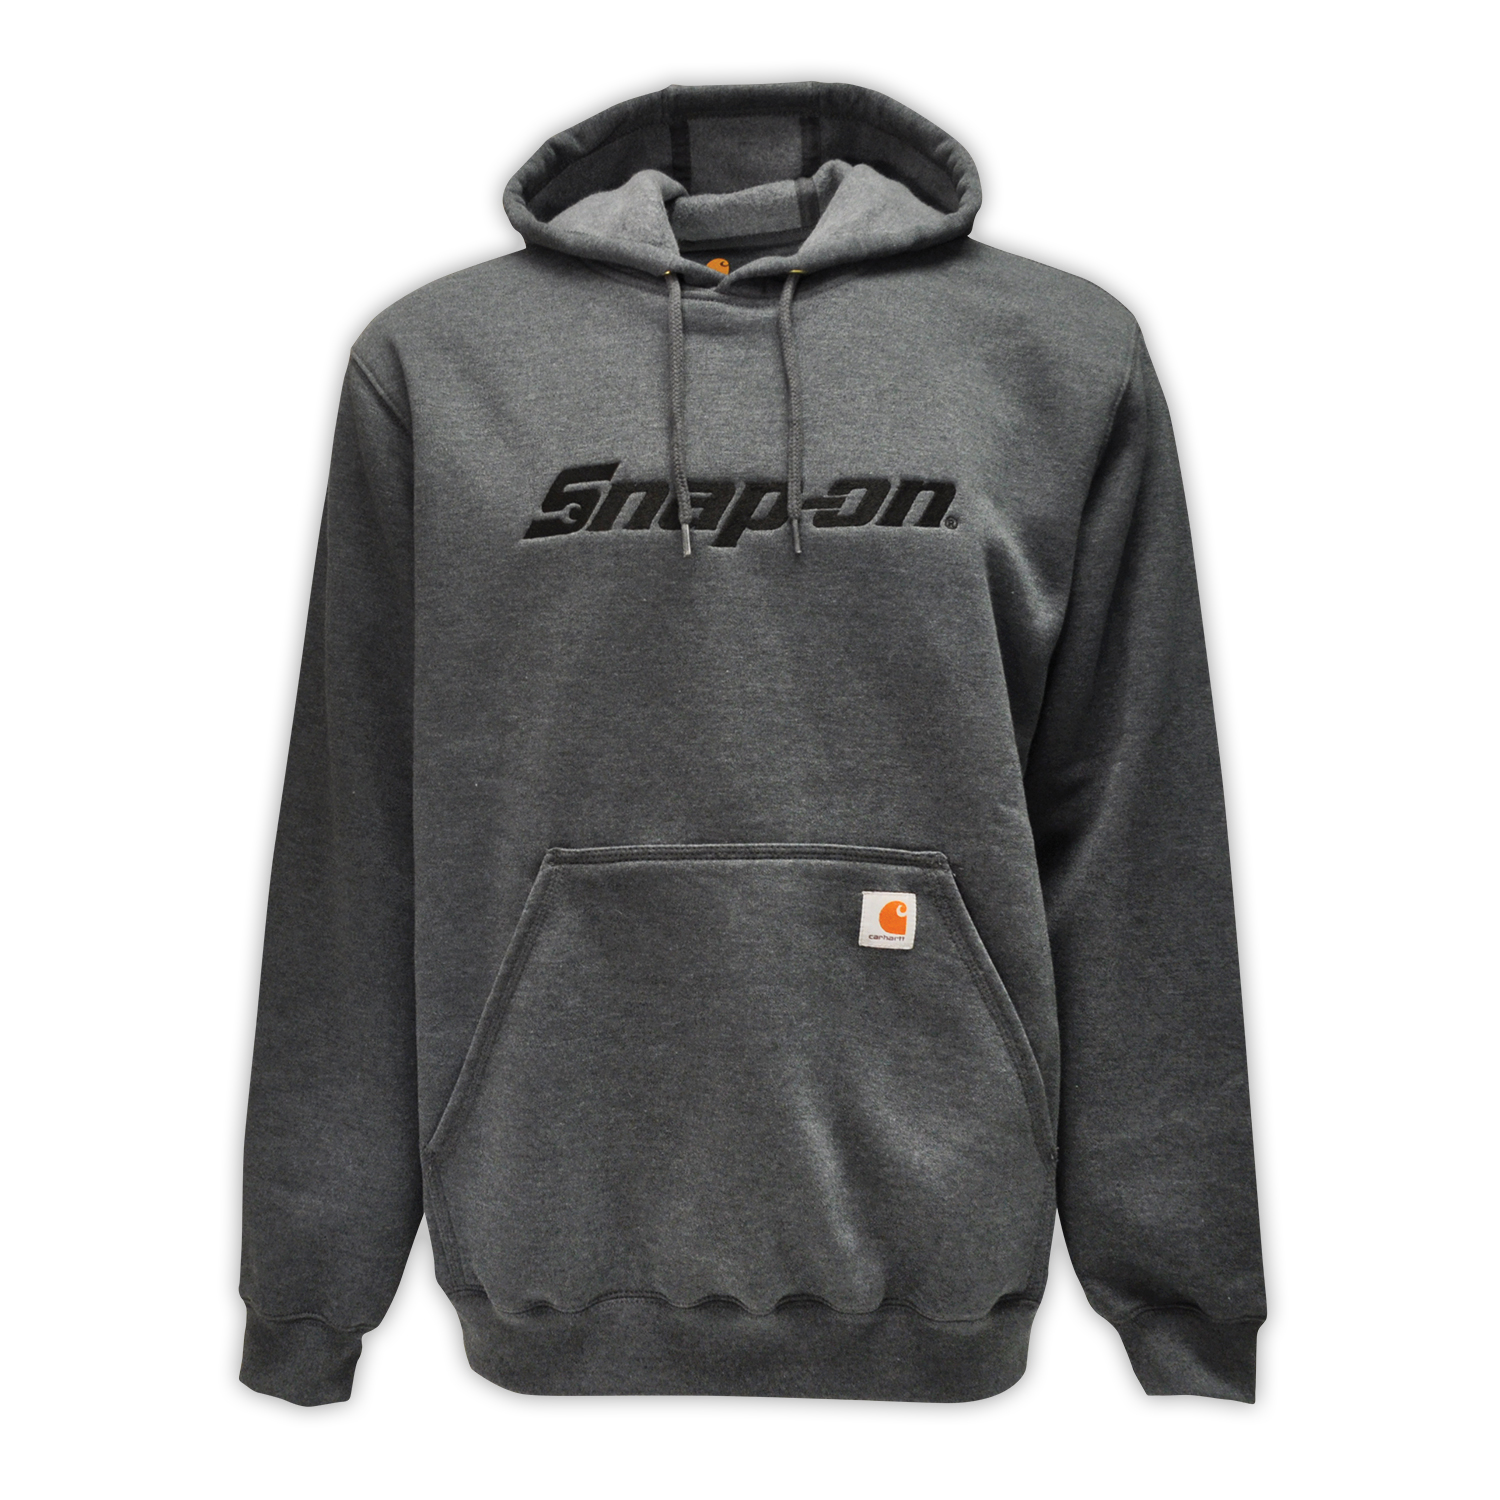 Charcoal Carhartt® Hoodie: Snap-on Consumer